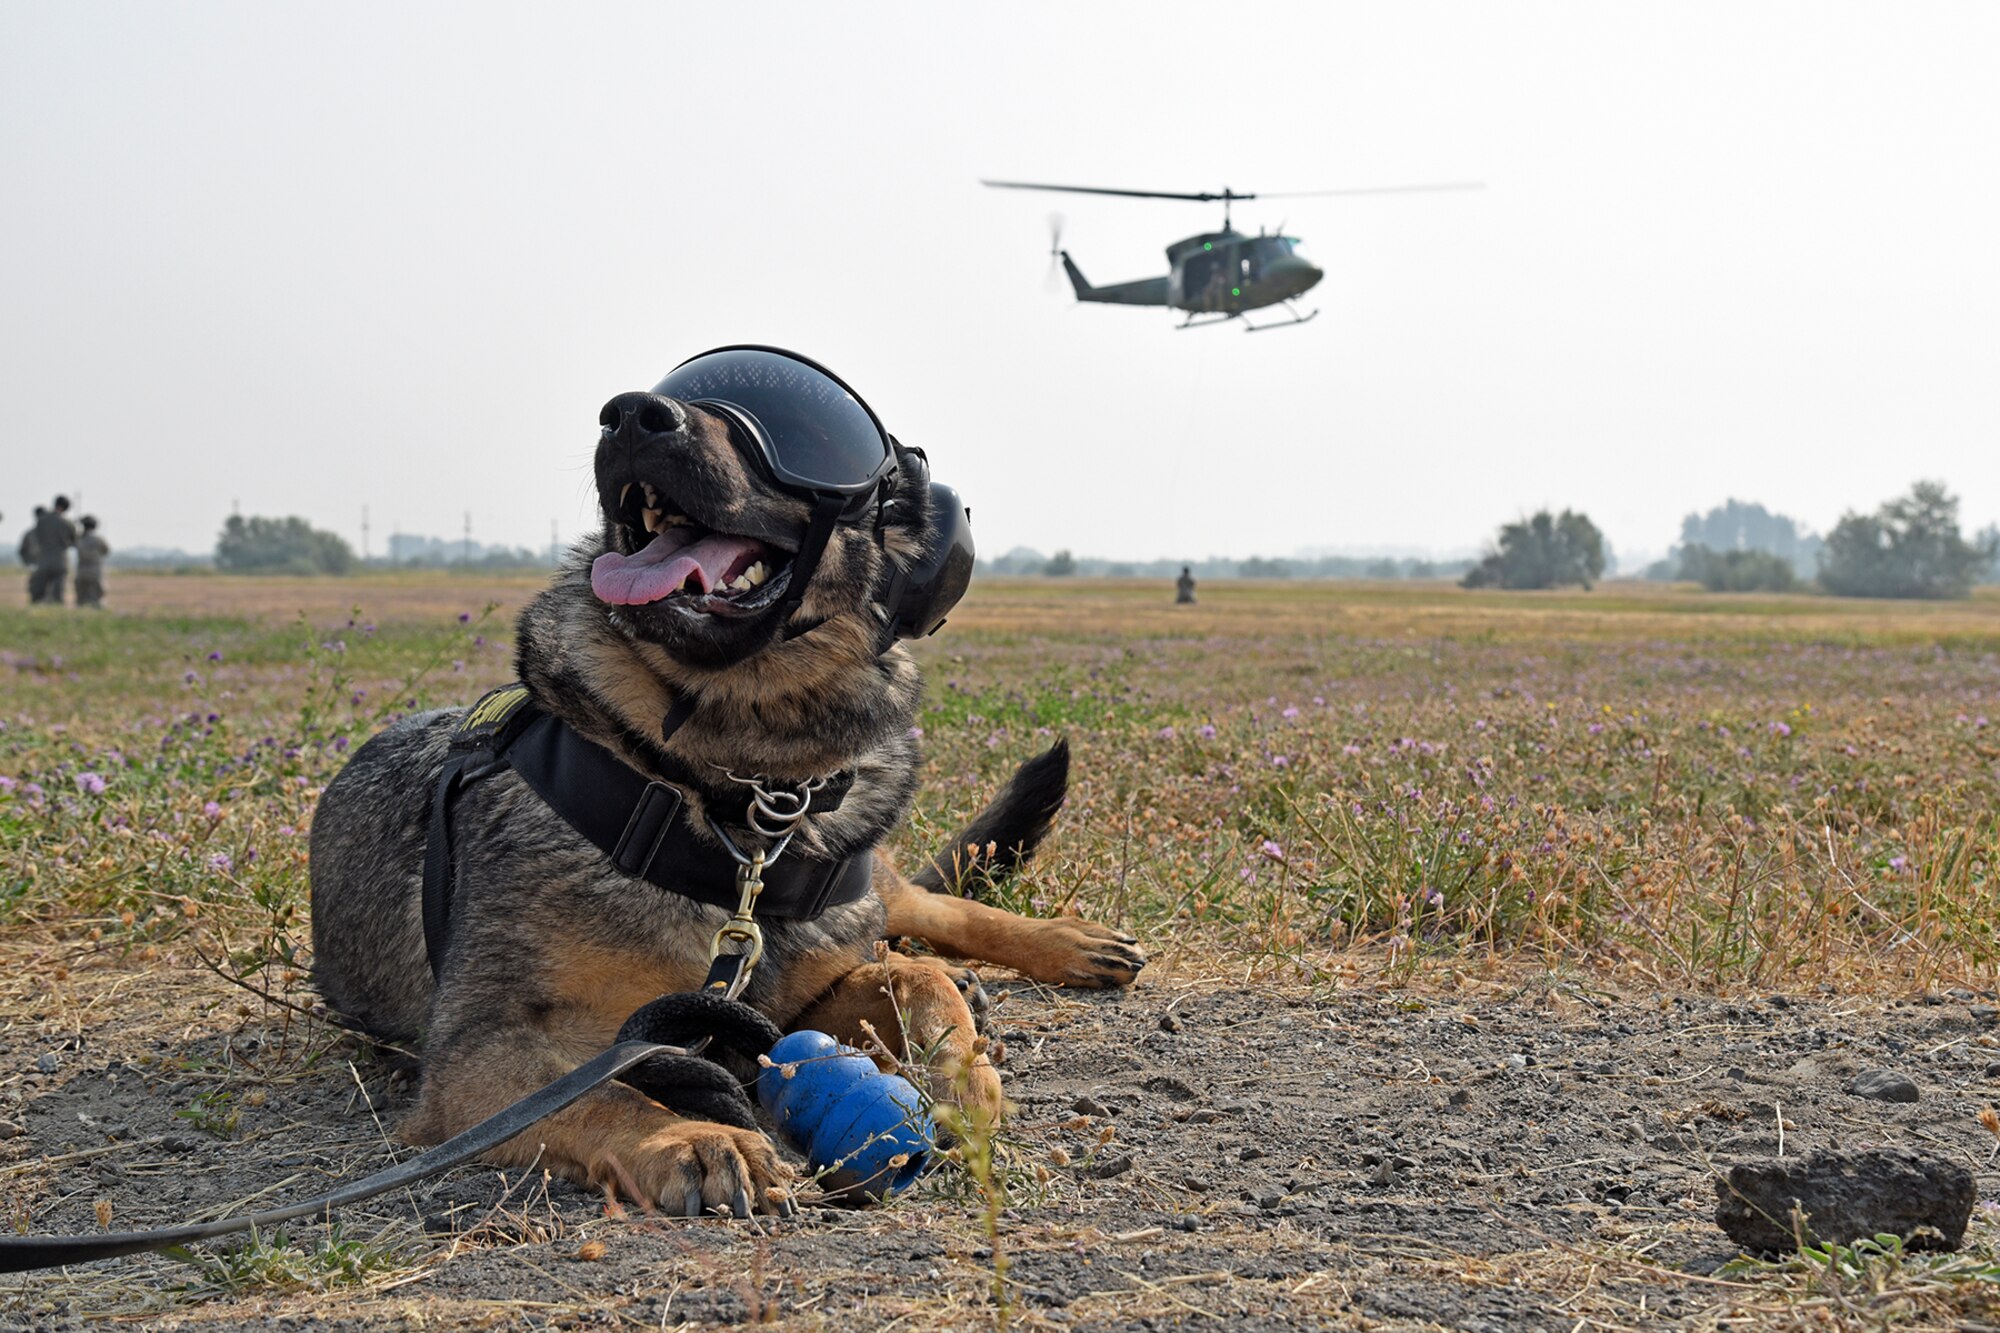 Military Working Dog Brenda waits to board a huey during training with the 36th Rescue Squadron Aug. 15, 2018, at Fairchild Air Force Base, Washington. The 36th RQS spent numerous days working closely with the 92nd Security Forces Squadron MWD section to familiarize the canines with the stimuli associated with helicopters. (U.S. Air Force photo/Staff Sgt. Mackenzie Mendez)